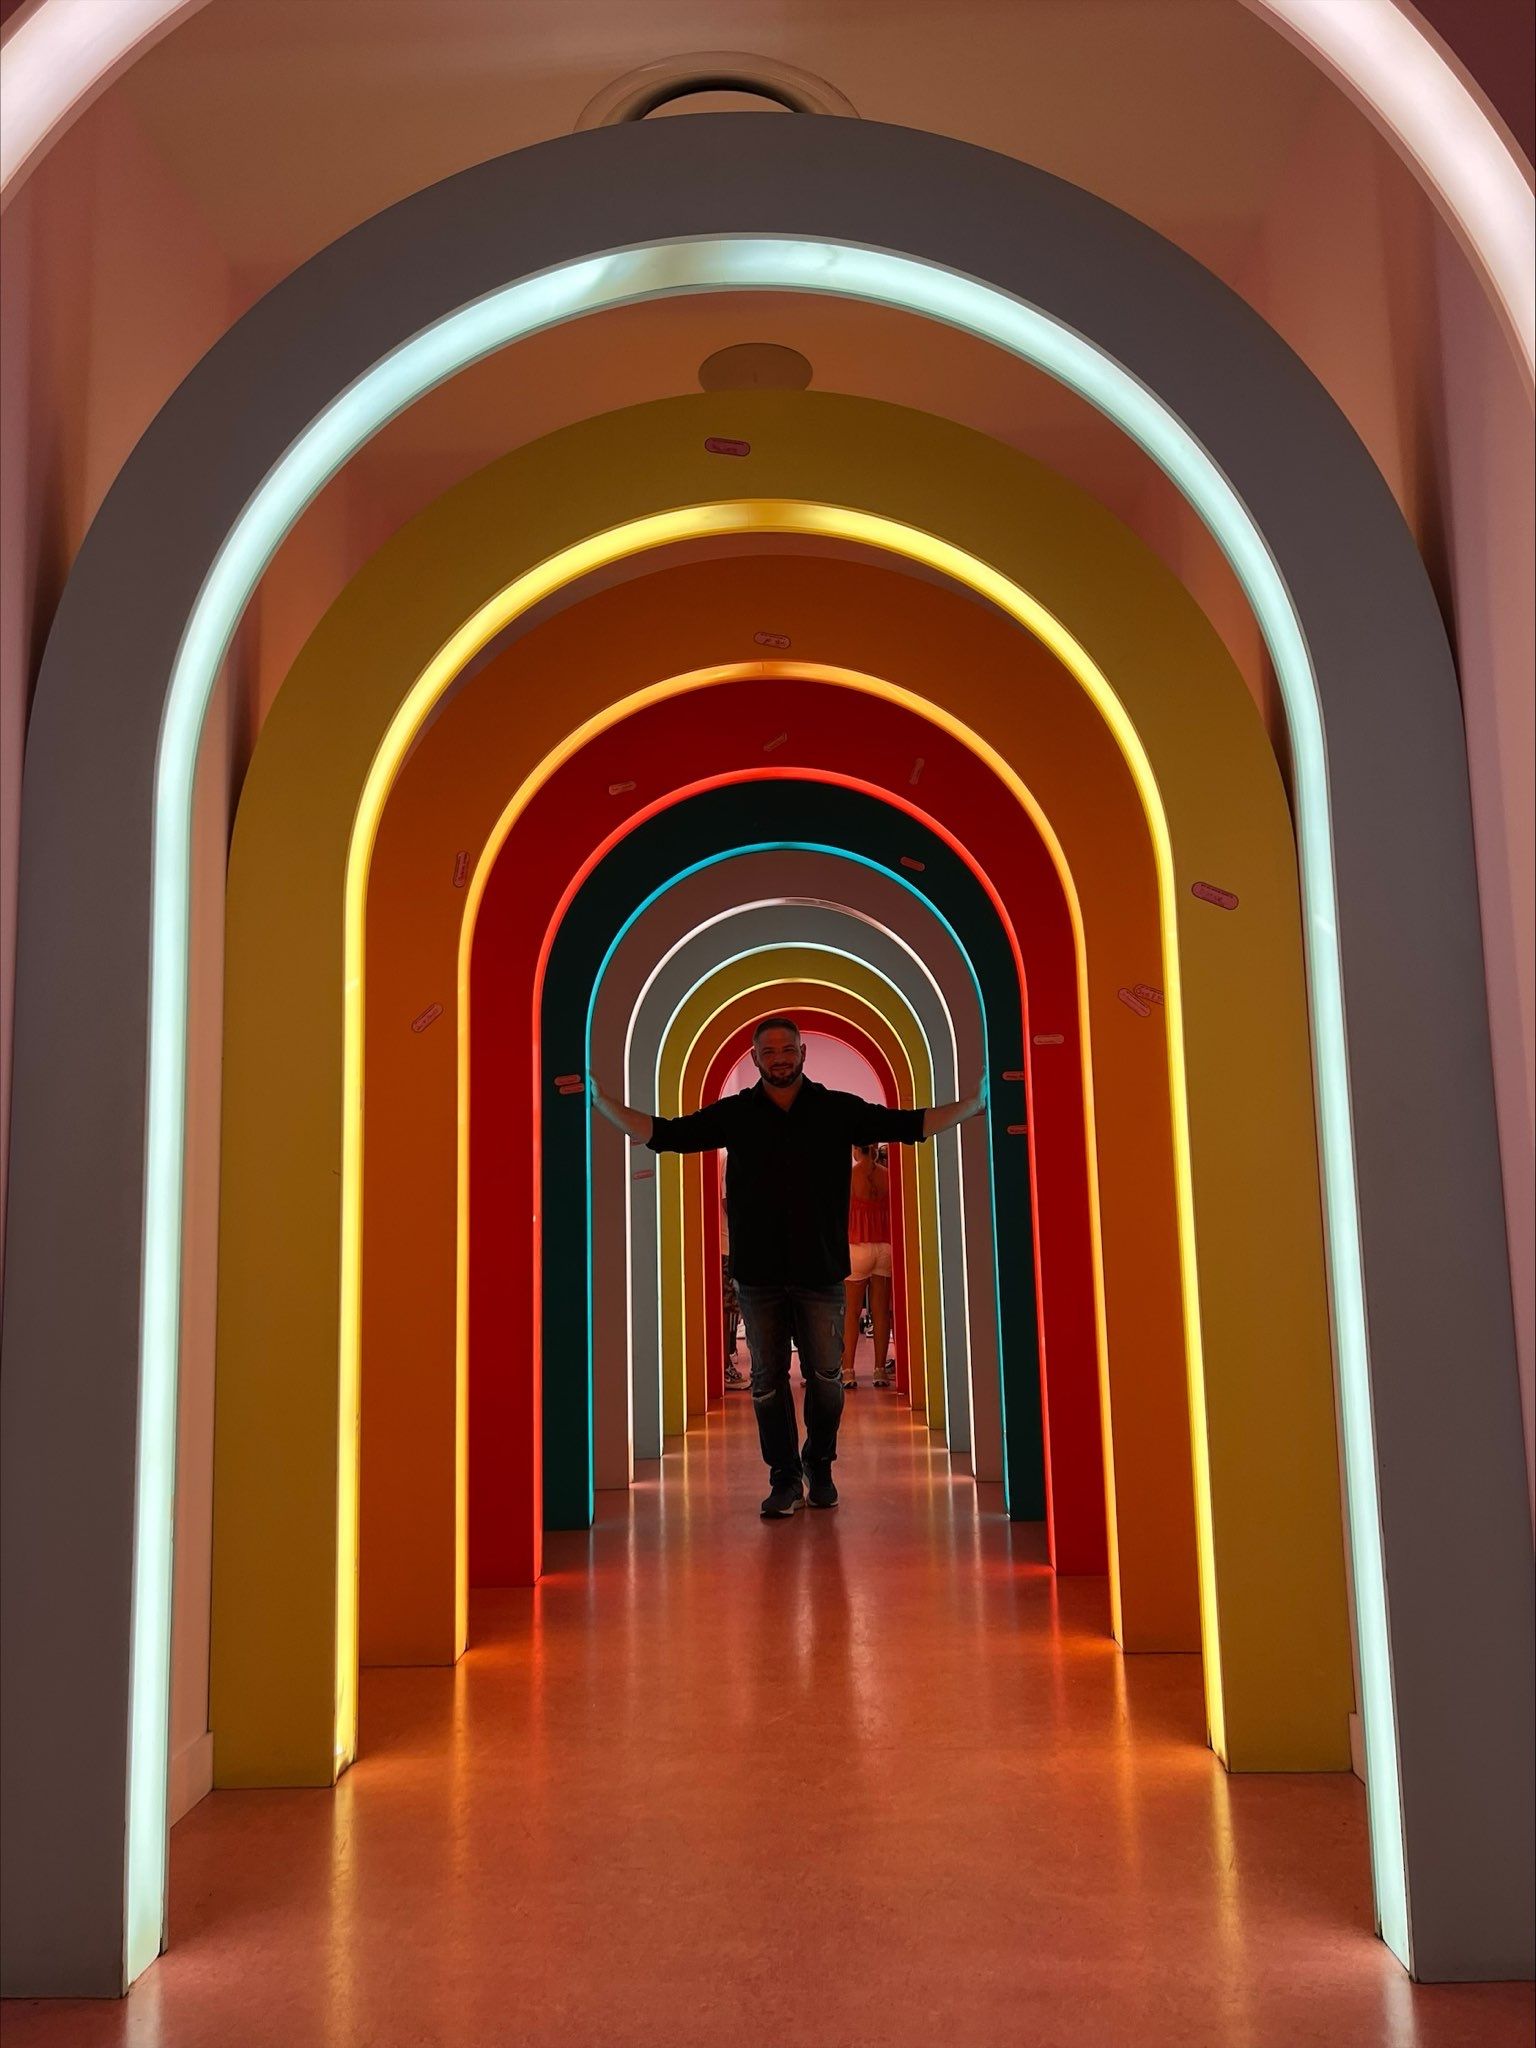 A man is standing in a rainbow colored tunnel with his arms outstretched